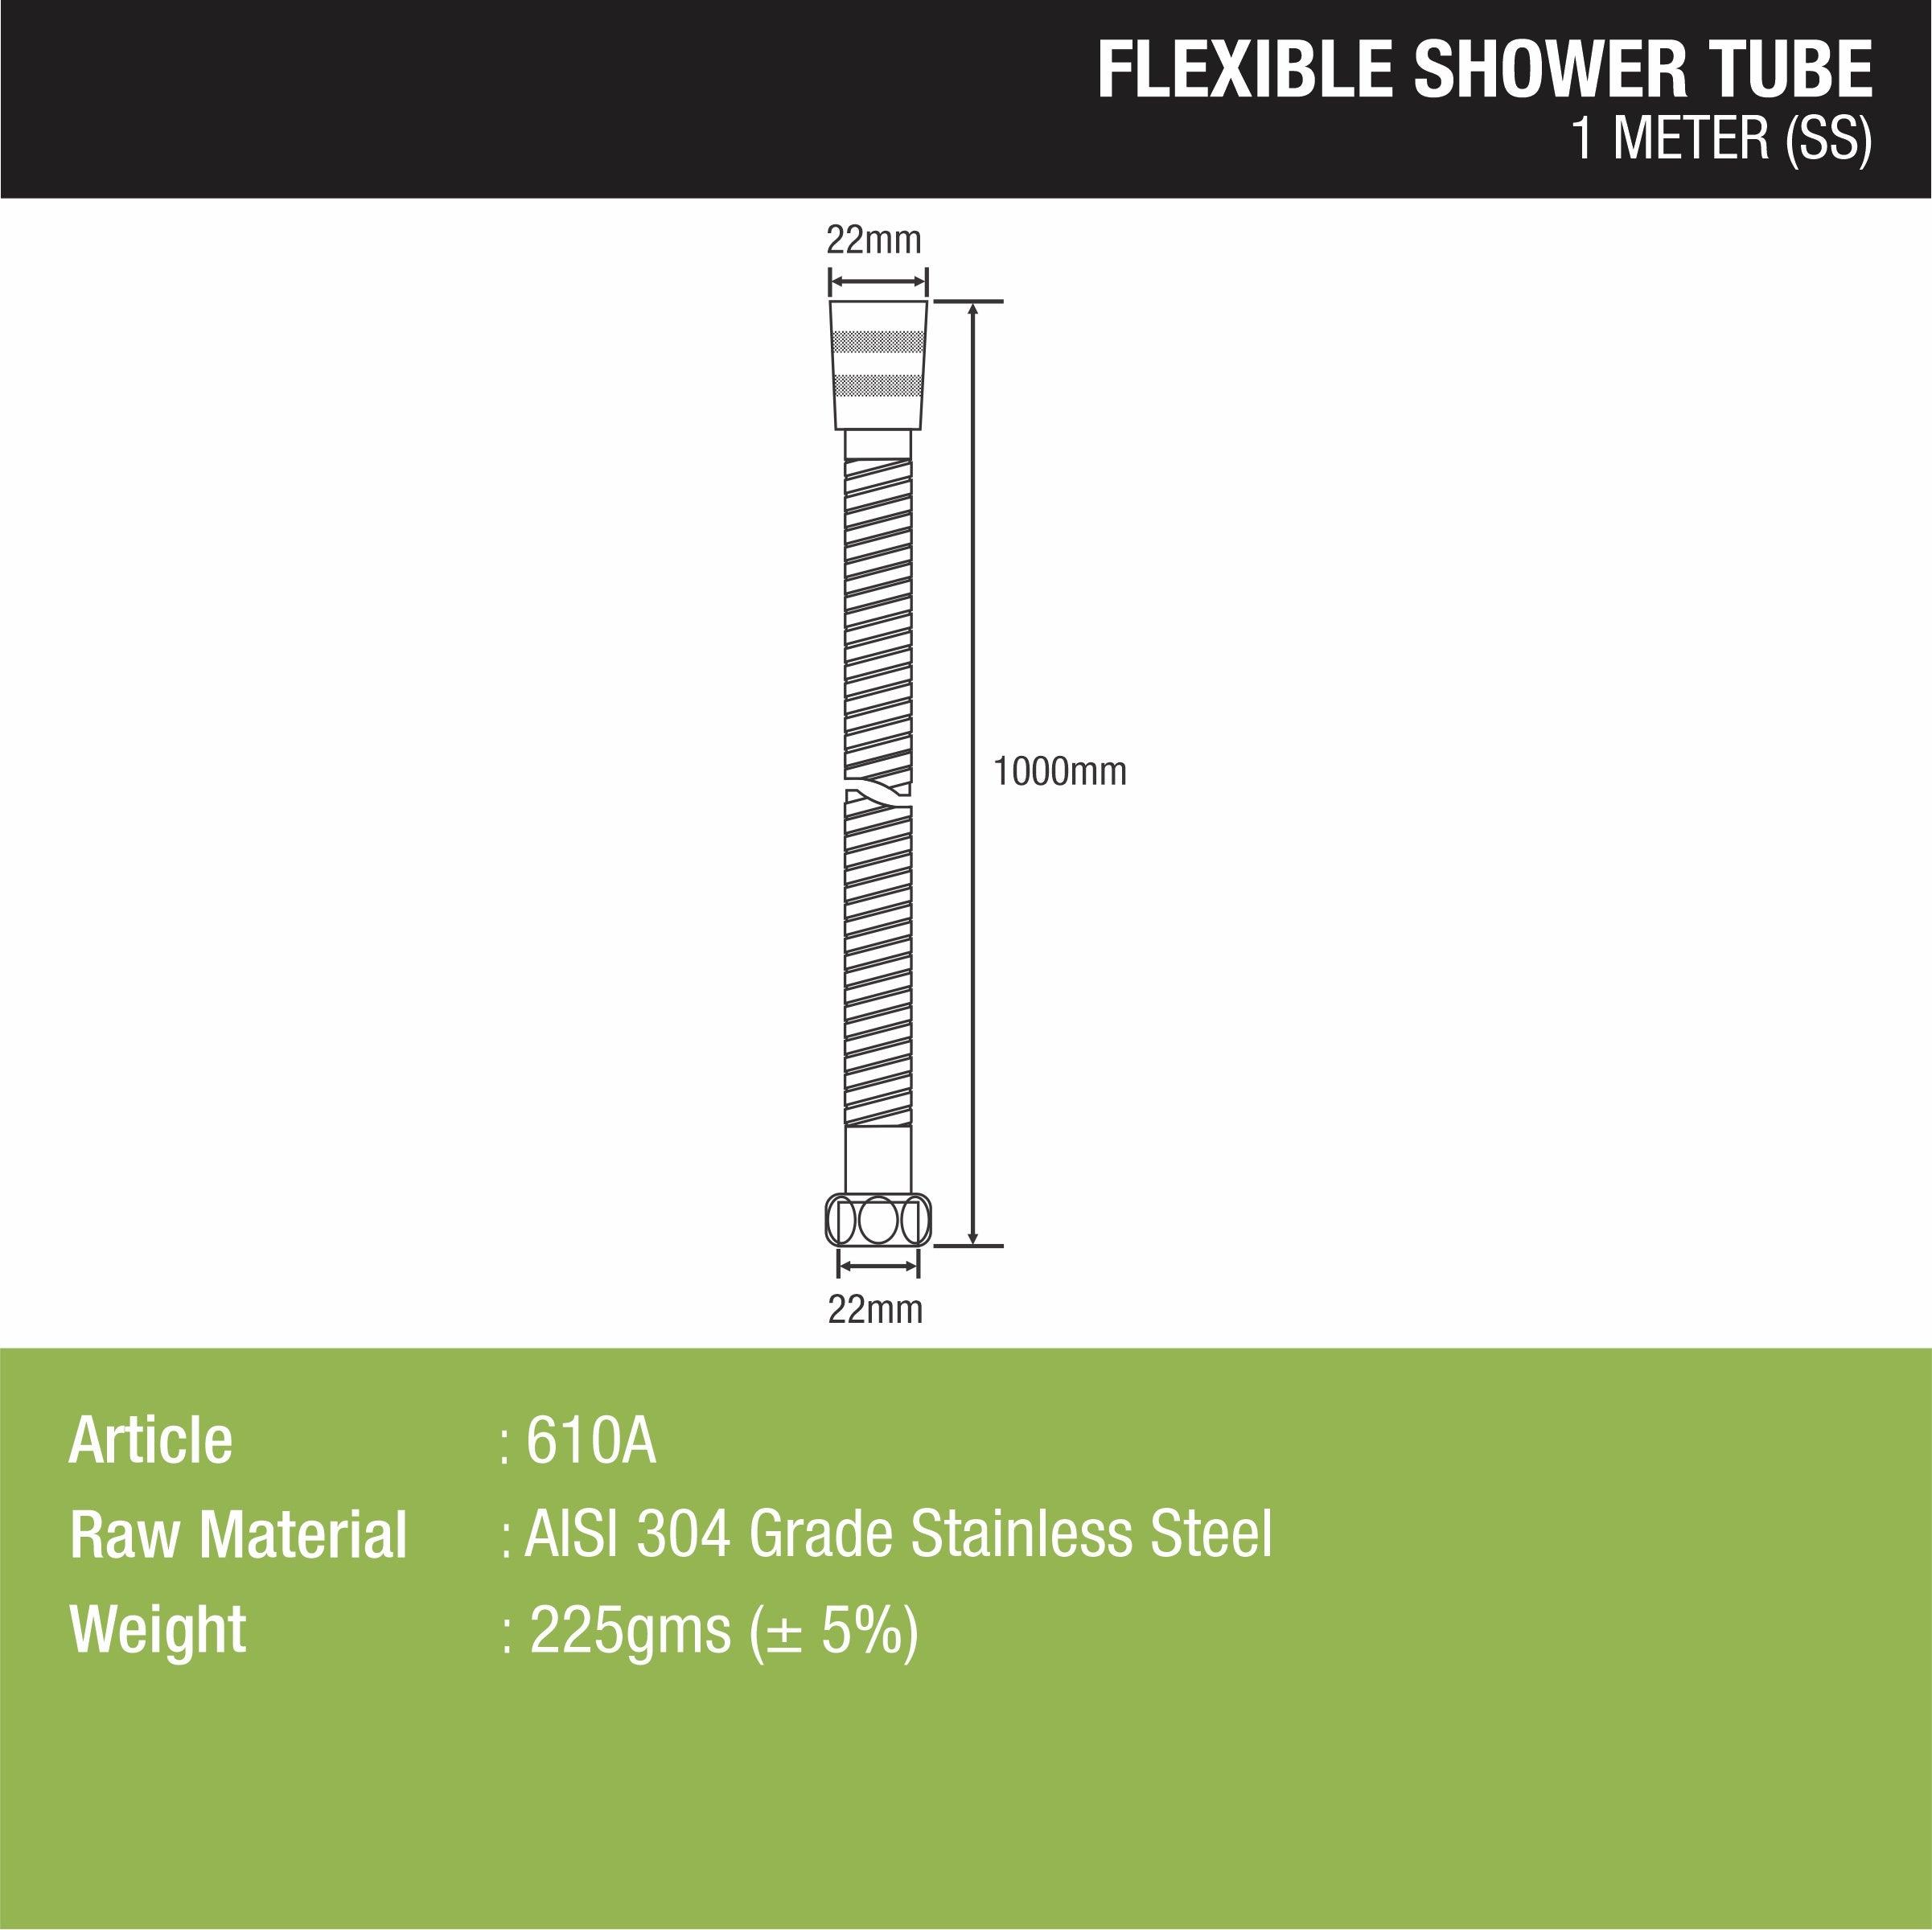 Flexible Shower Tube (1 Meter) sizes and dimensions